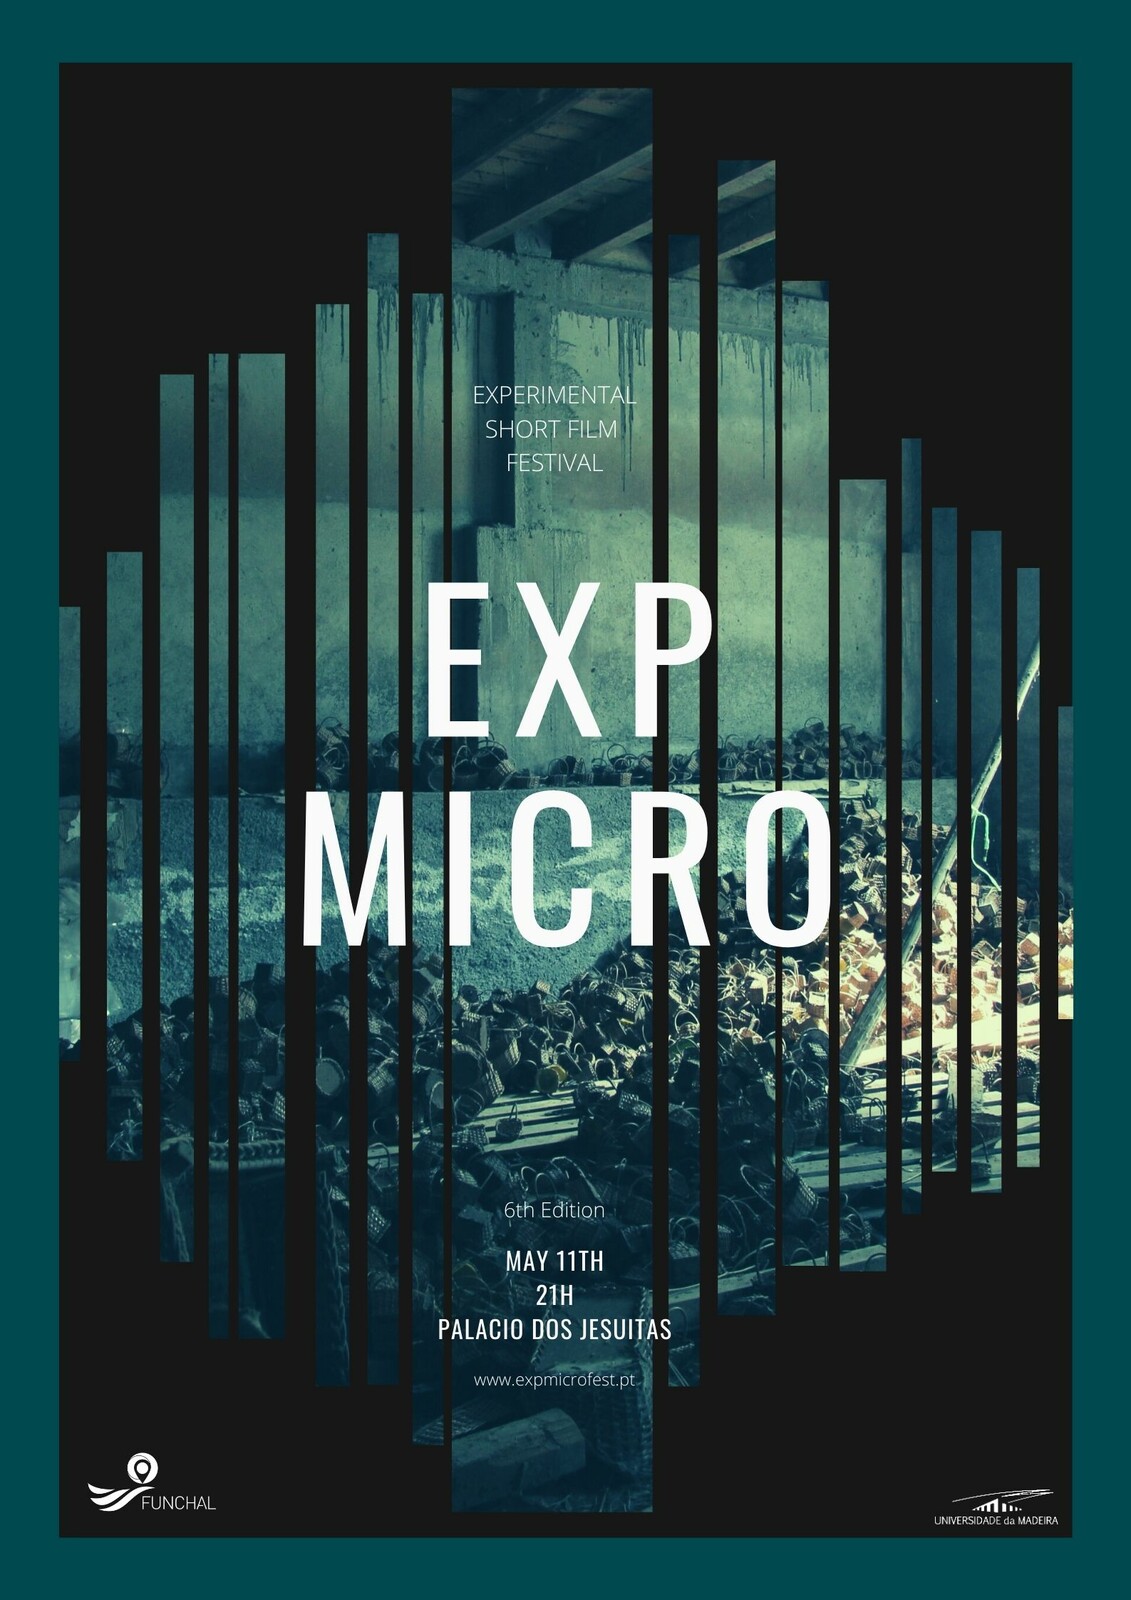 EXP MICRO FEST Poster, 6th Edition (2016)